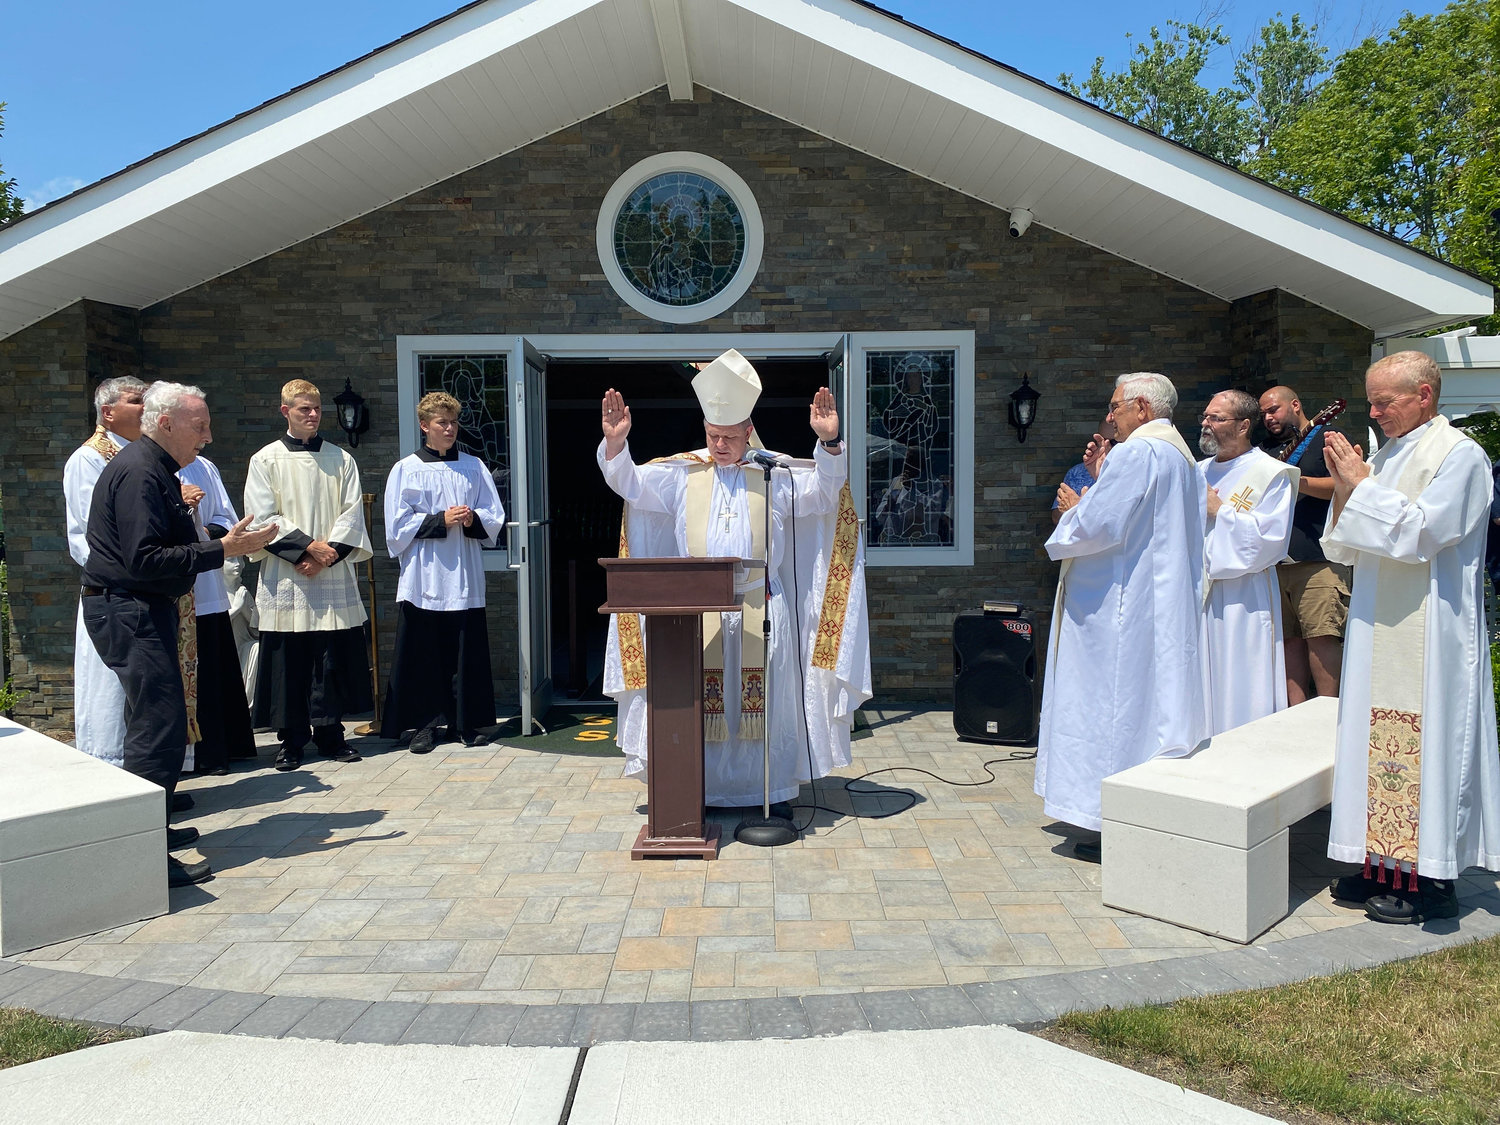 Outside the shrine, a dedication ceremony was performed by Bishop Robert Coyle.